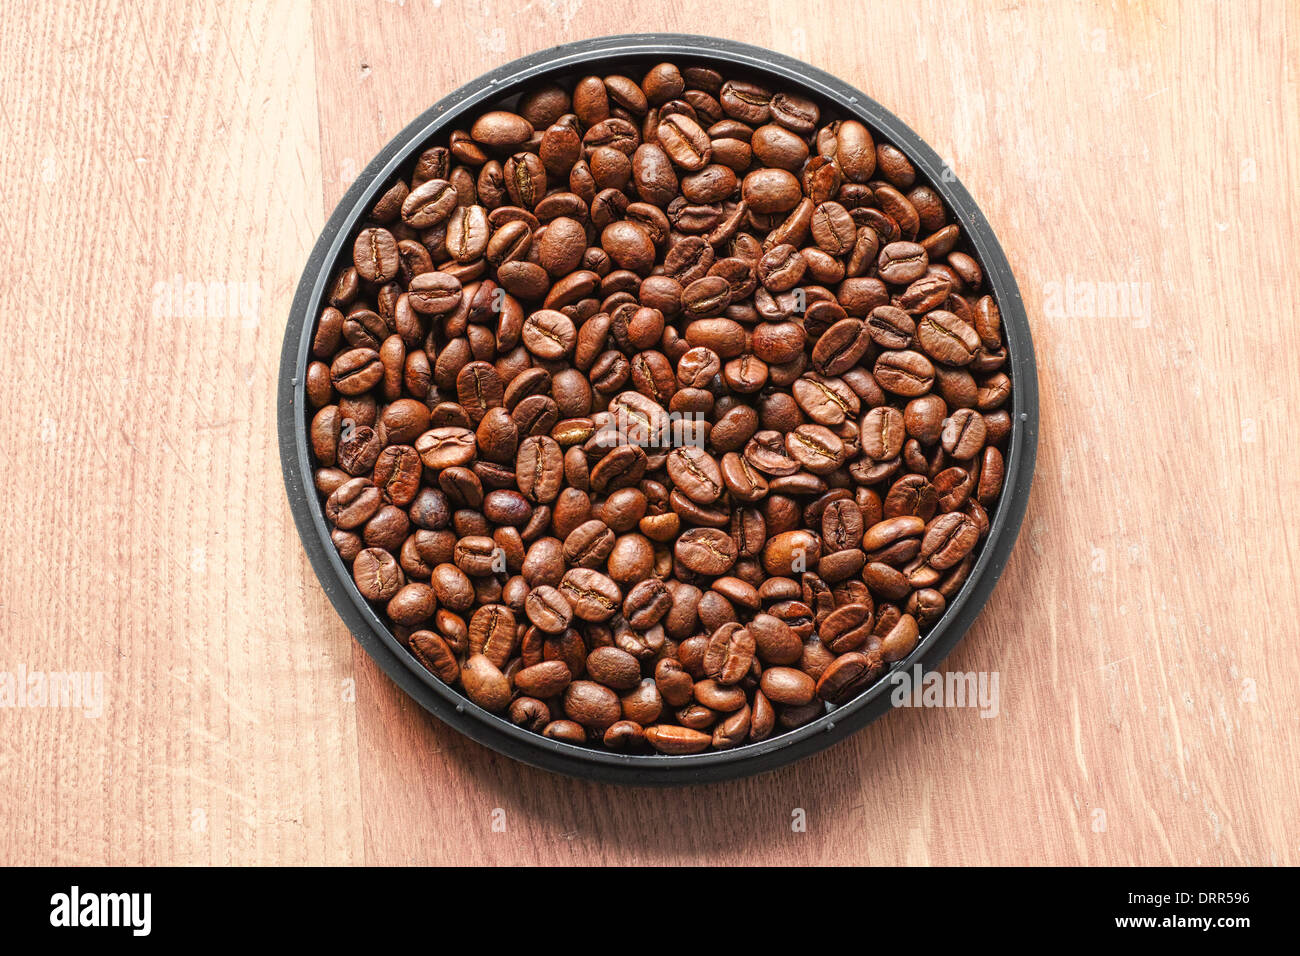 An abundance of roasted coffee beans in a circular bowl. Stock Photo